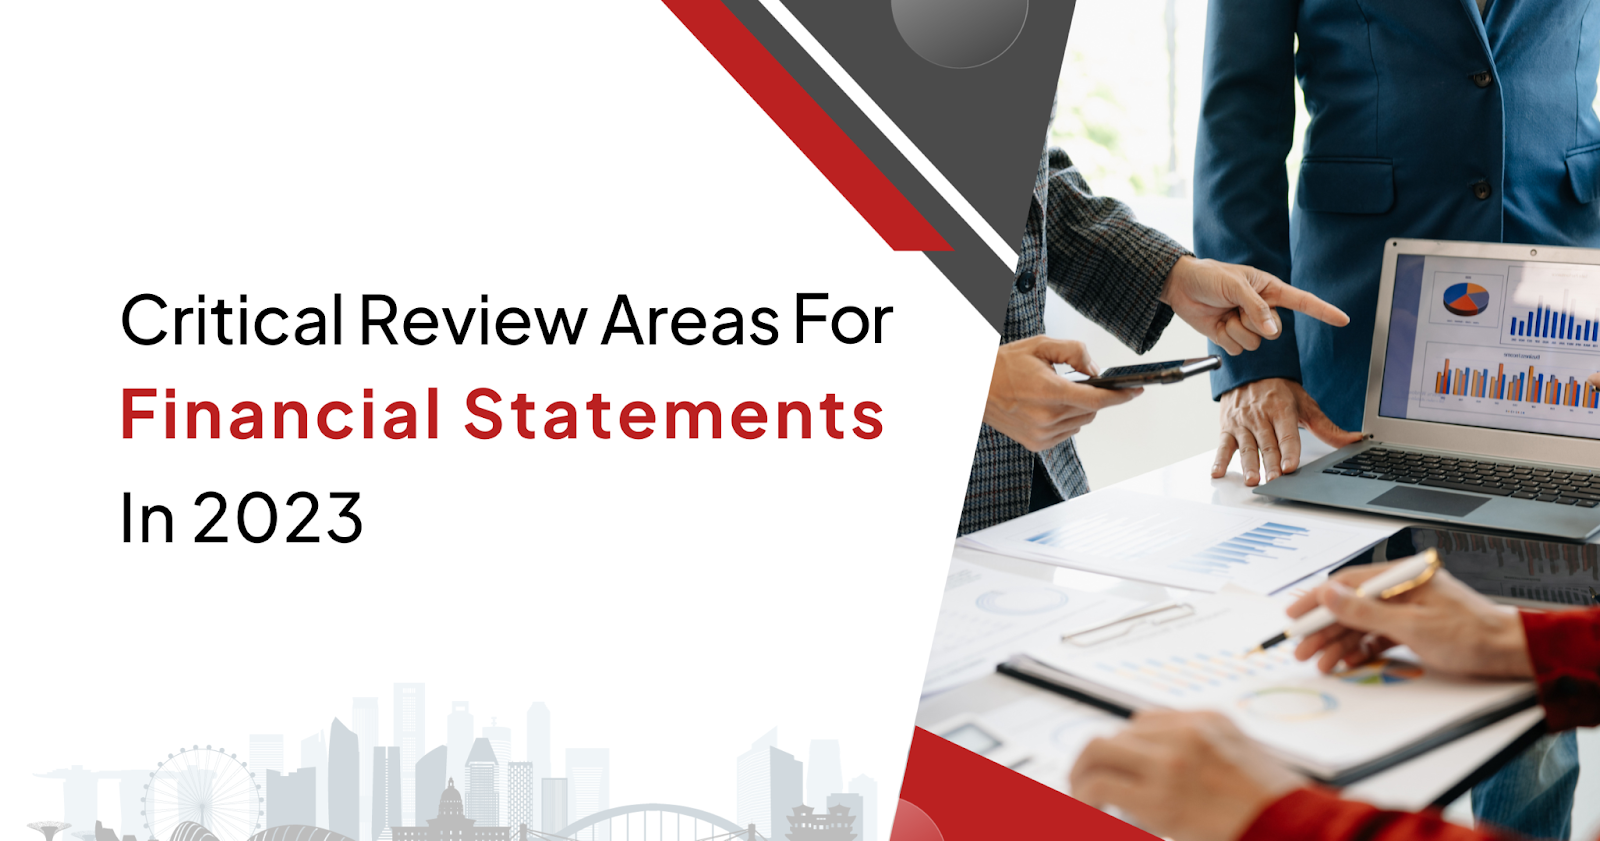 Financial Statements Critical Areas